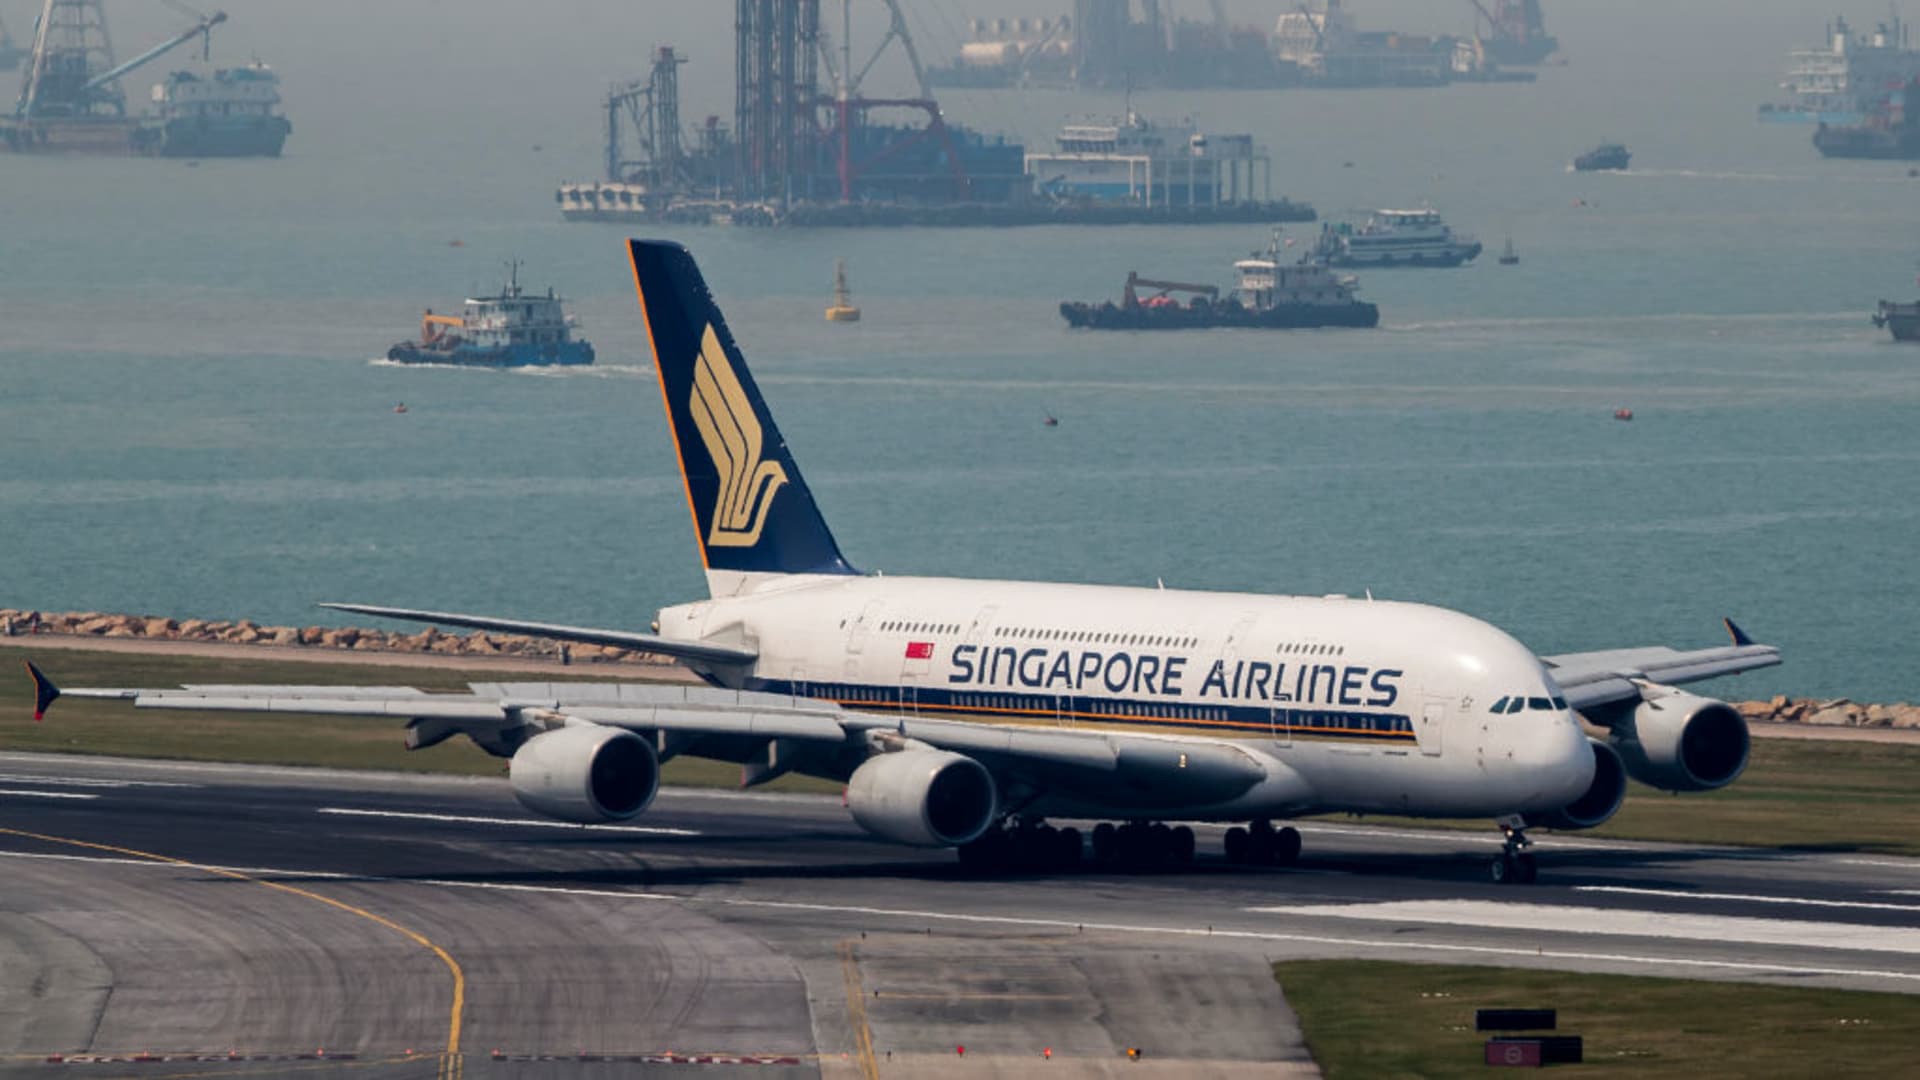 Singapore outbound flights to cost more from 2026 over green fuel requirements [Video]